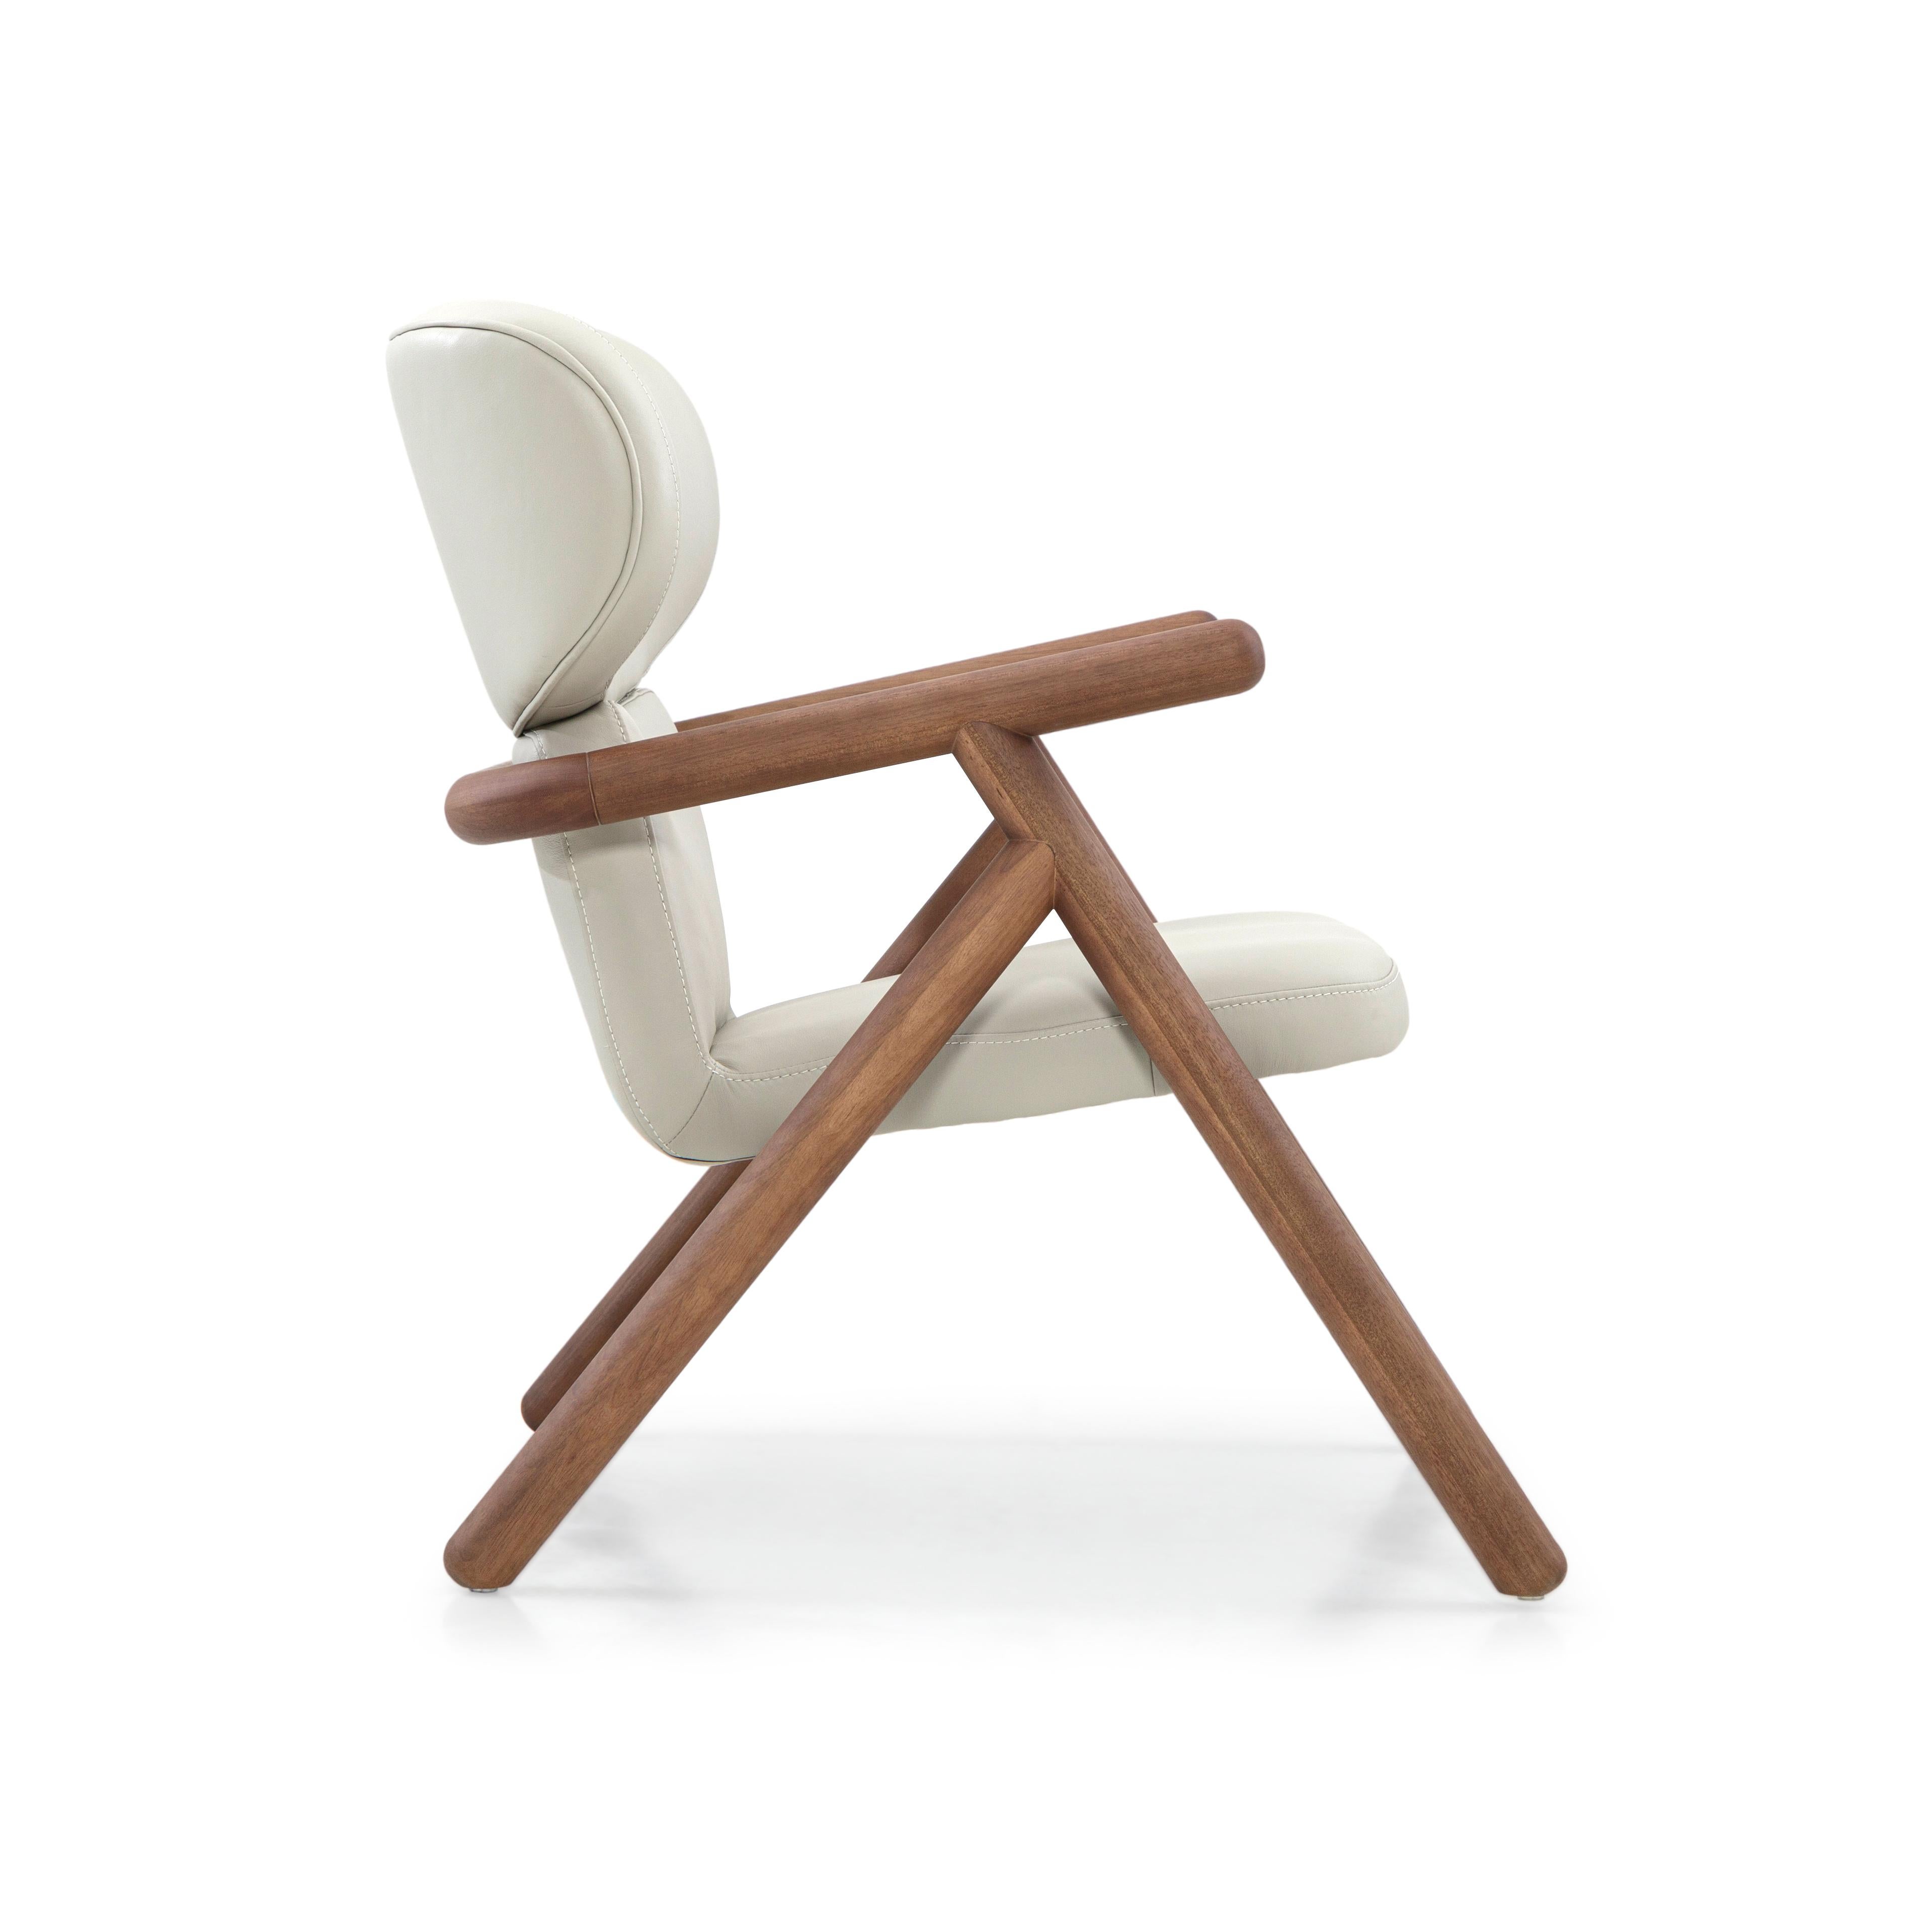 Brazilian Sole Scandinavian-Styled Armchair in Walnut Wood Finish and Off-White Leather For Sale